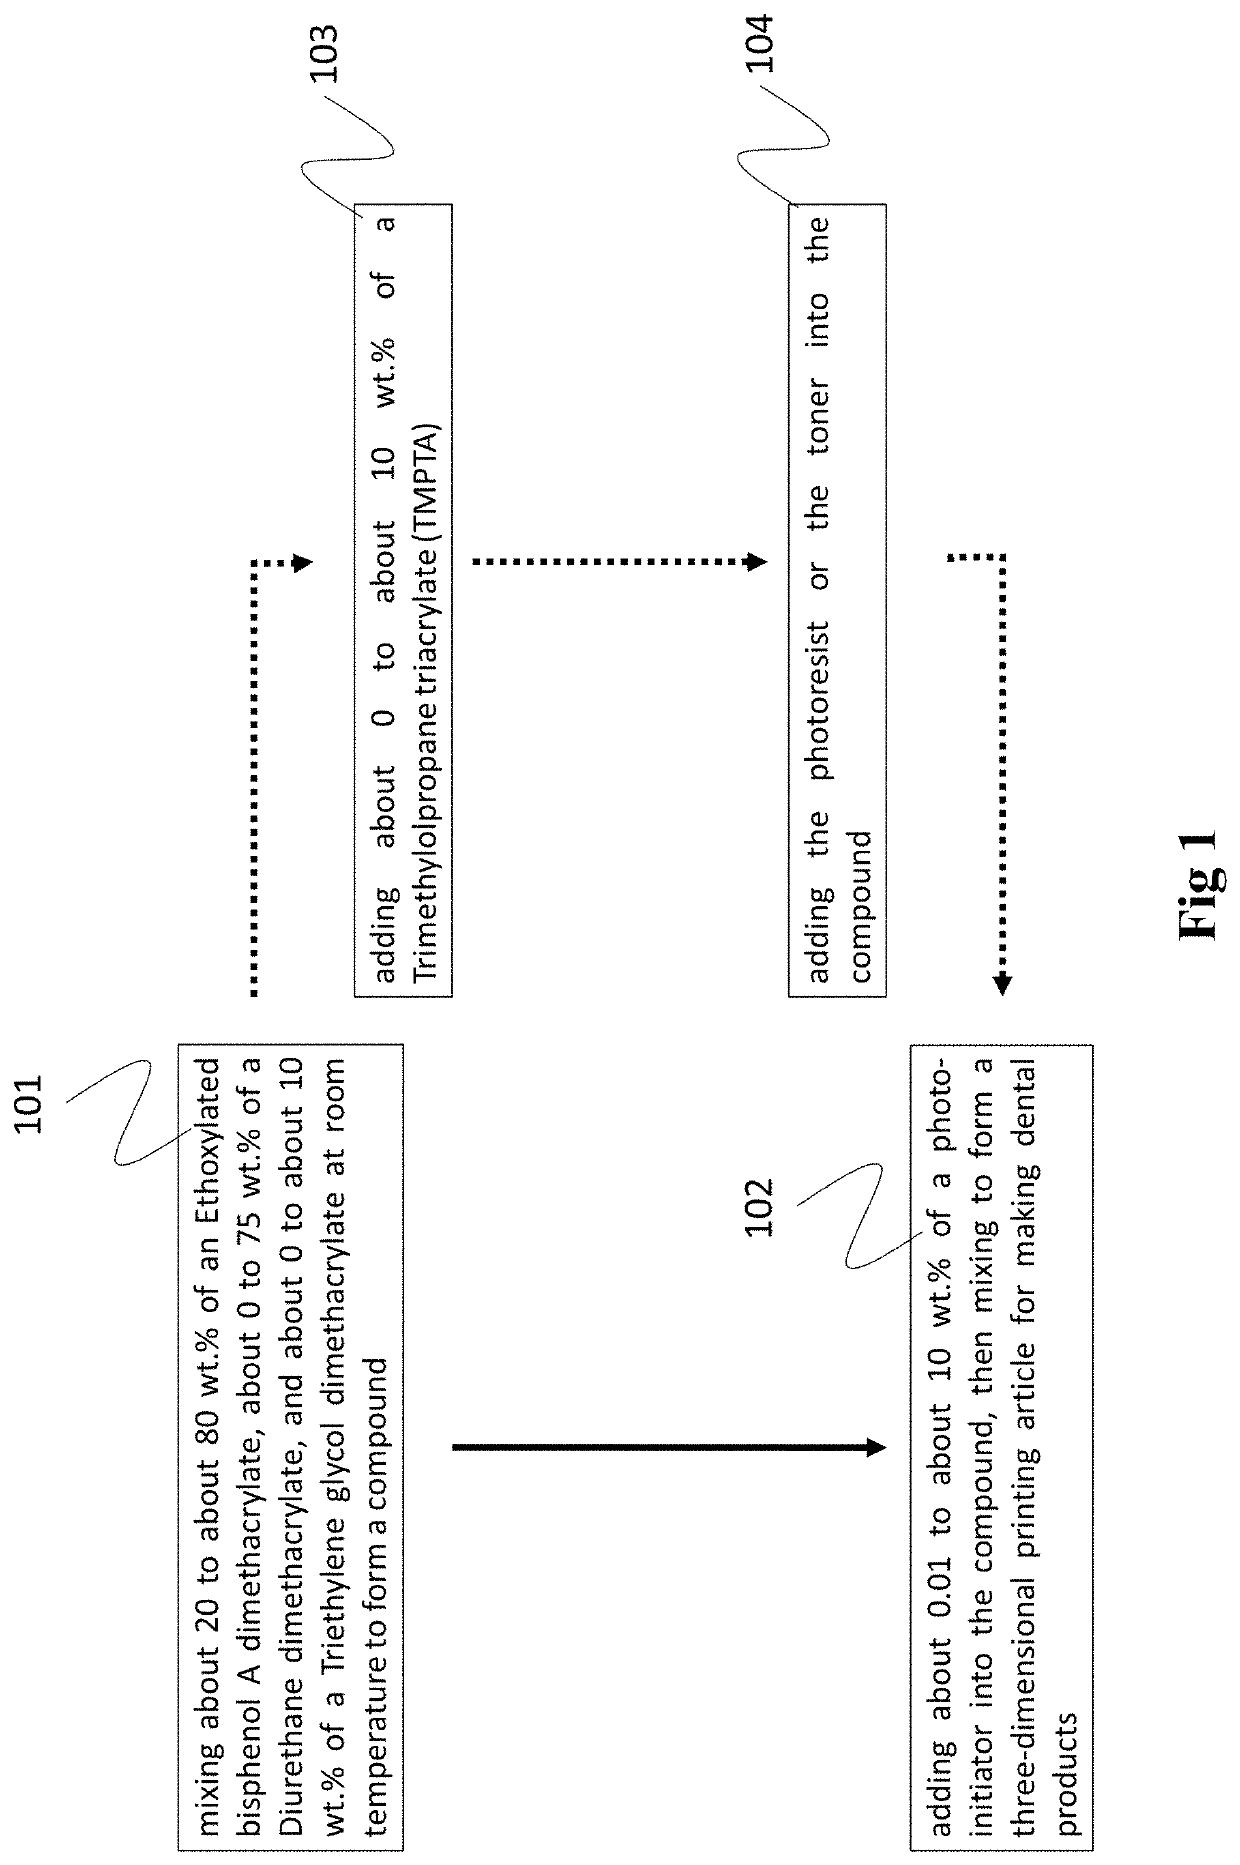 Three-dimensional printing methods and materials for making dental products